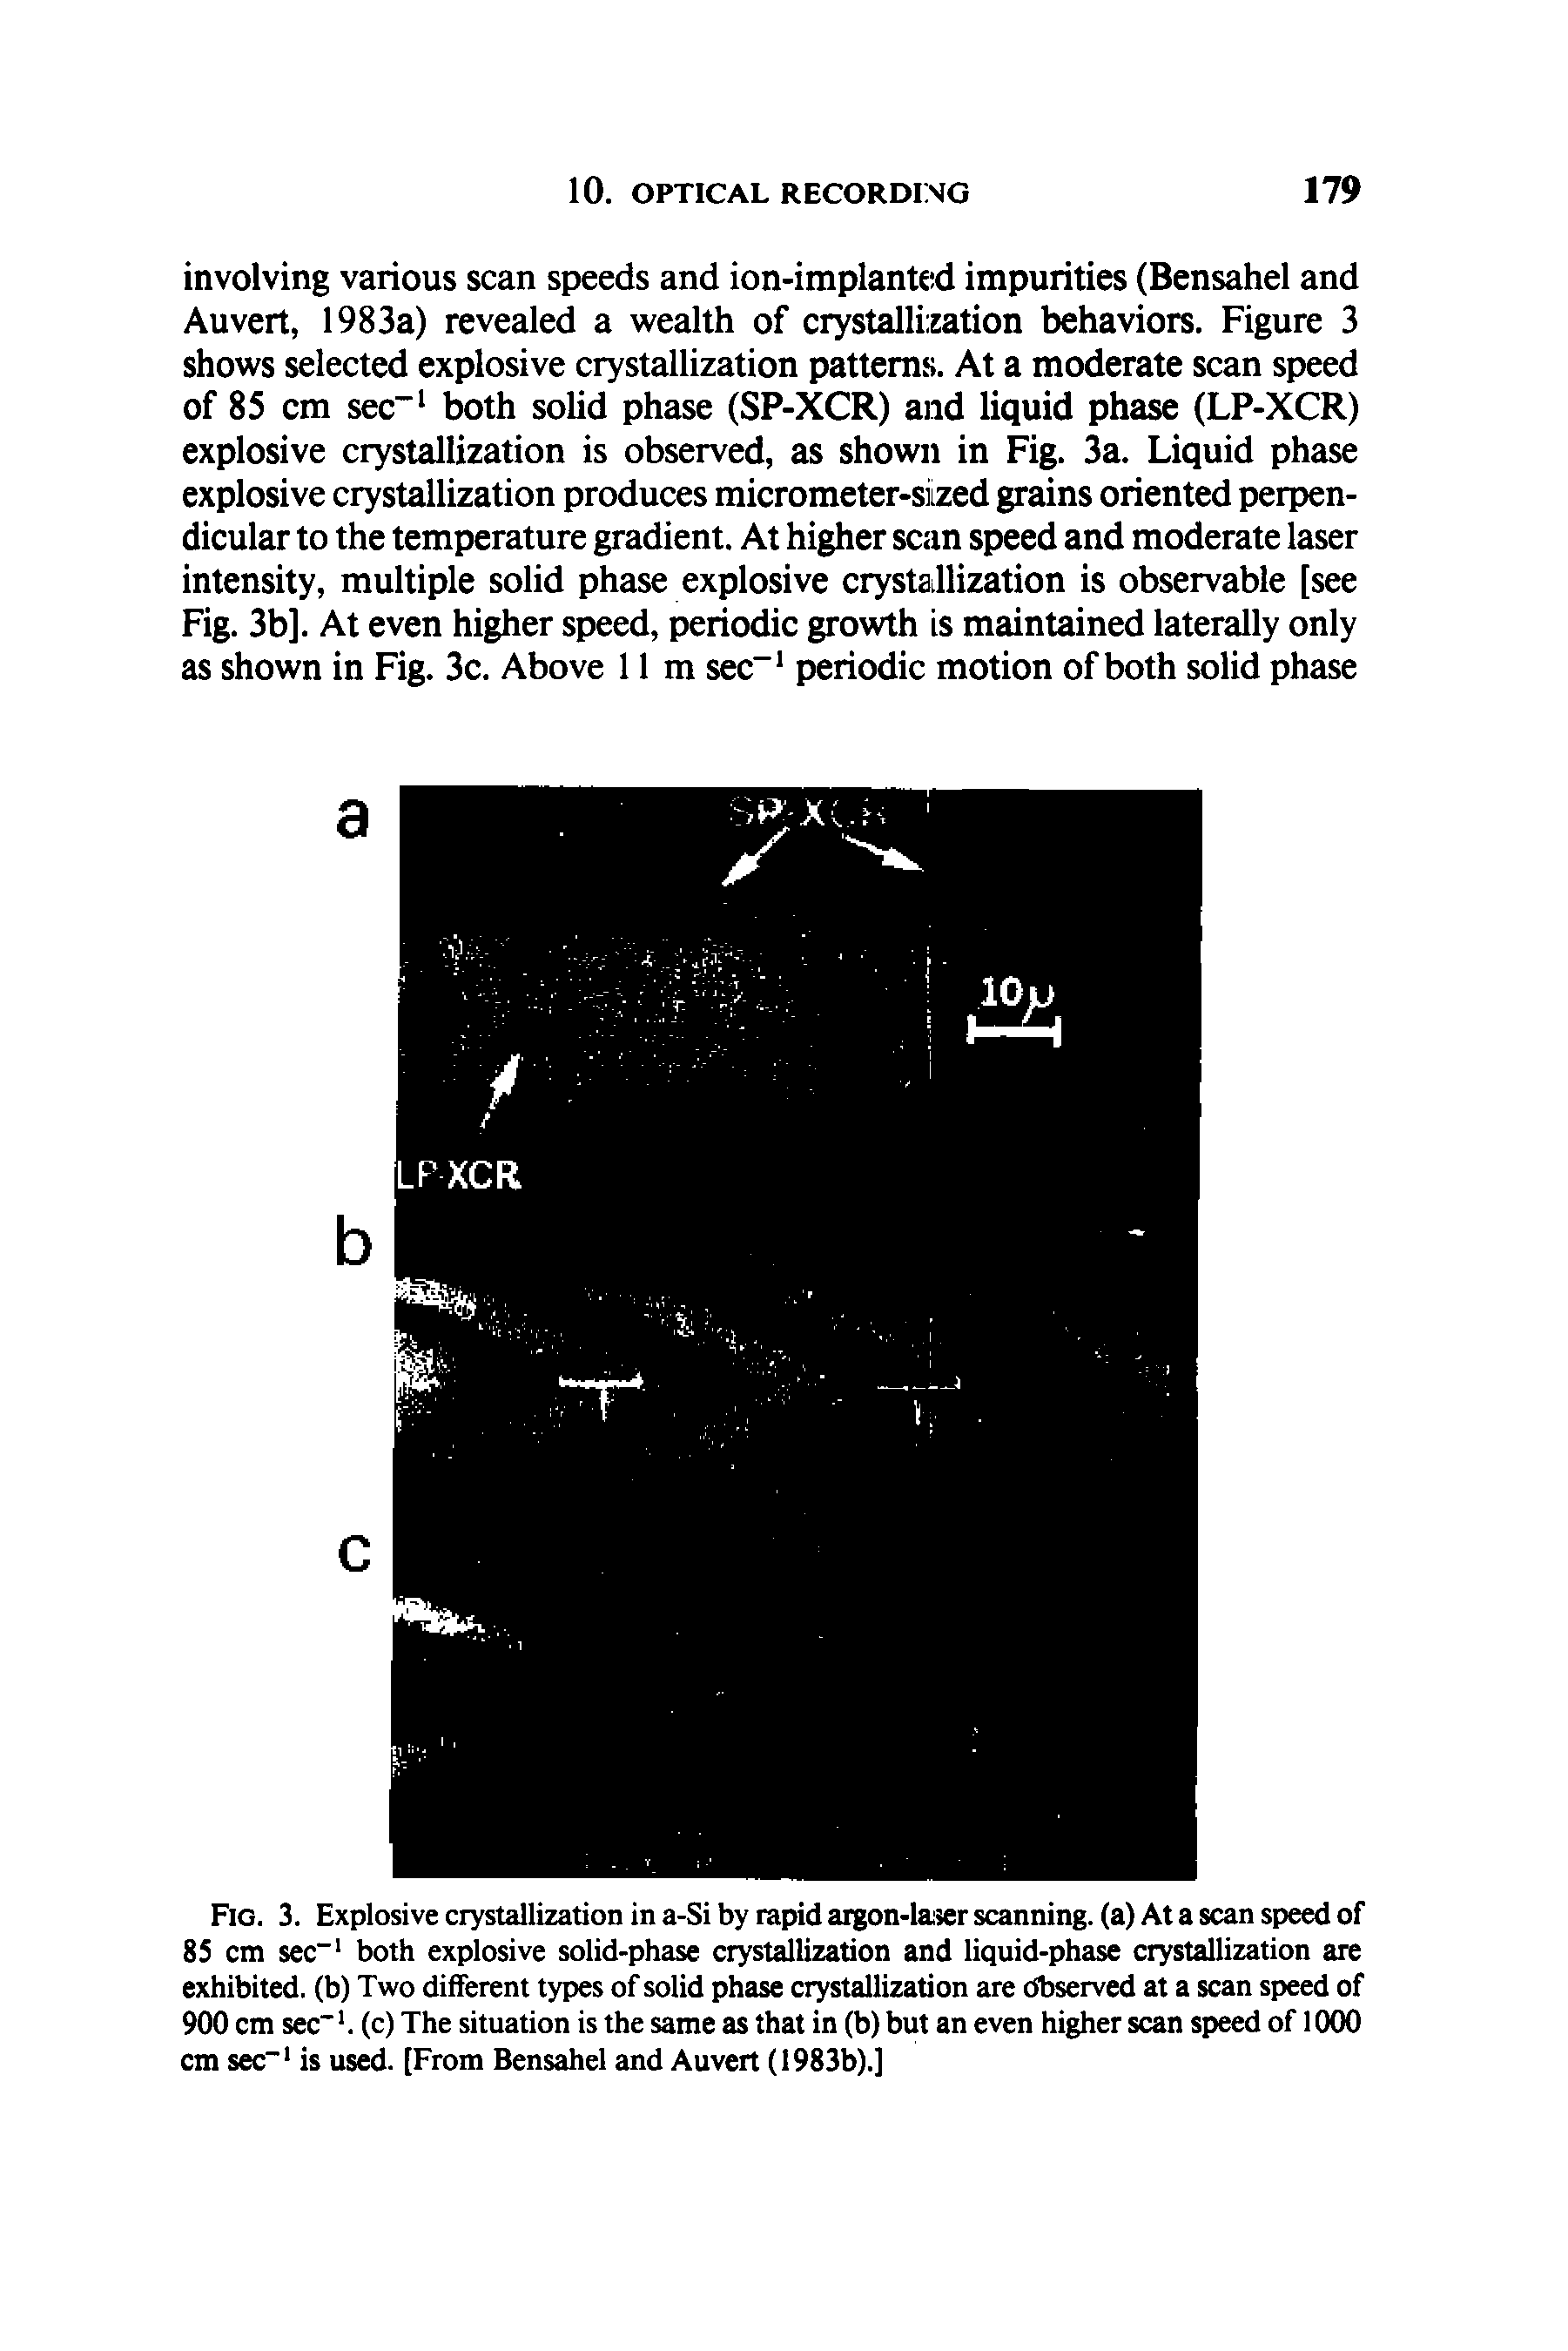 Fig. 3. Explosive crystallization in a-Si by rapid argon-laser scanning, (a) At a scan speed of 85 cm sec-1 both explosive solid-phase crystallization and liquid-phase crystallization are exhibited, (b) Two different types of solid phase crystallization are Observed at a scan speed of 900 cm sec 1, (c) The situation is the same as that in (b) but an even higher scan speed of 1000 cm sec 1 is used. [From Bensahel and Auvert (1983b).]...